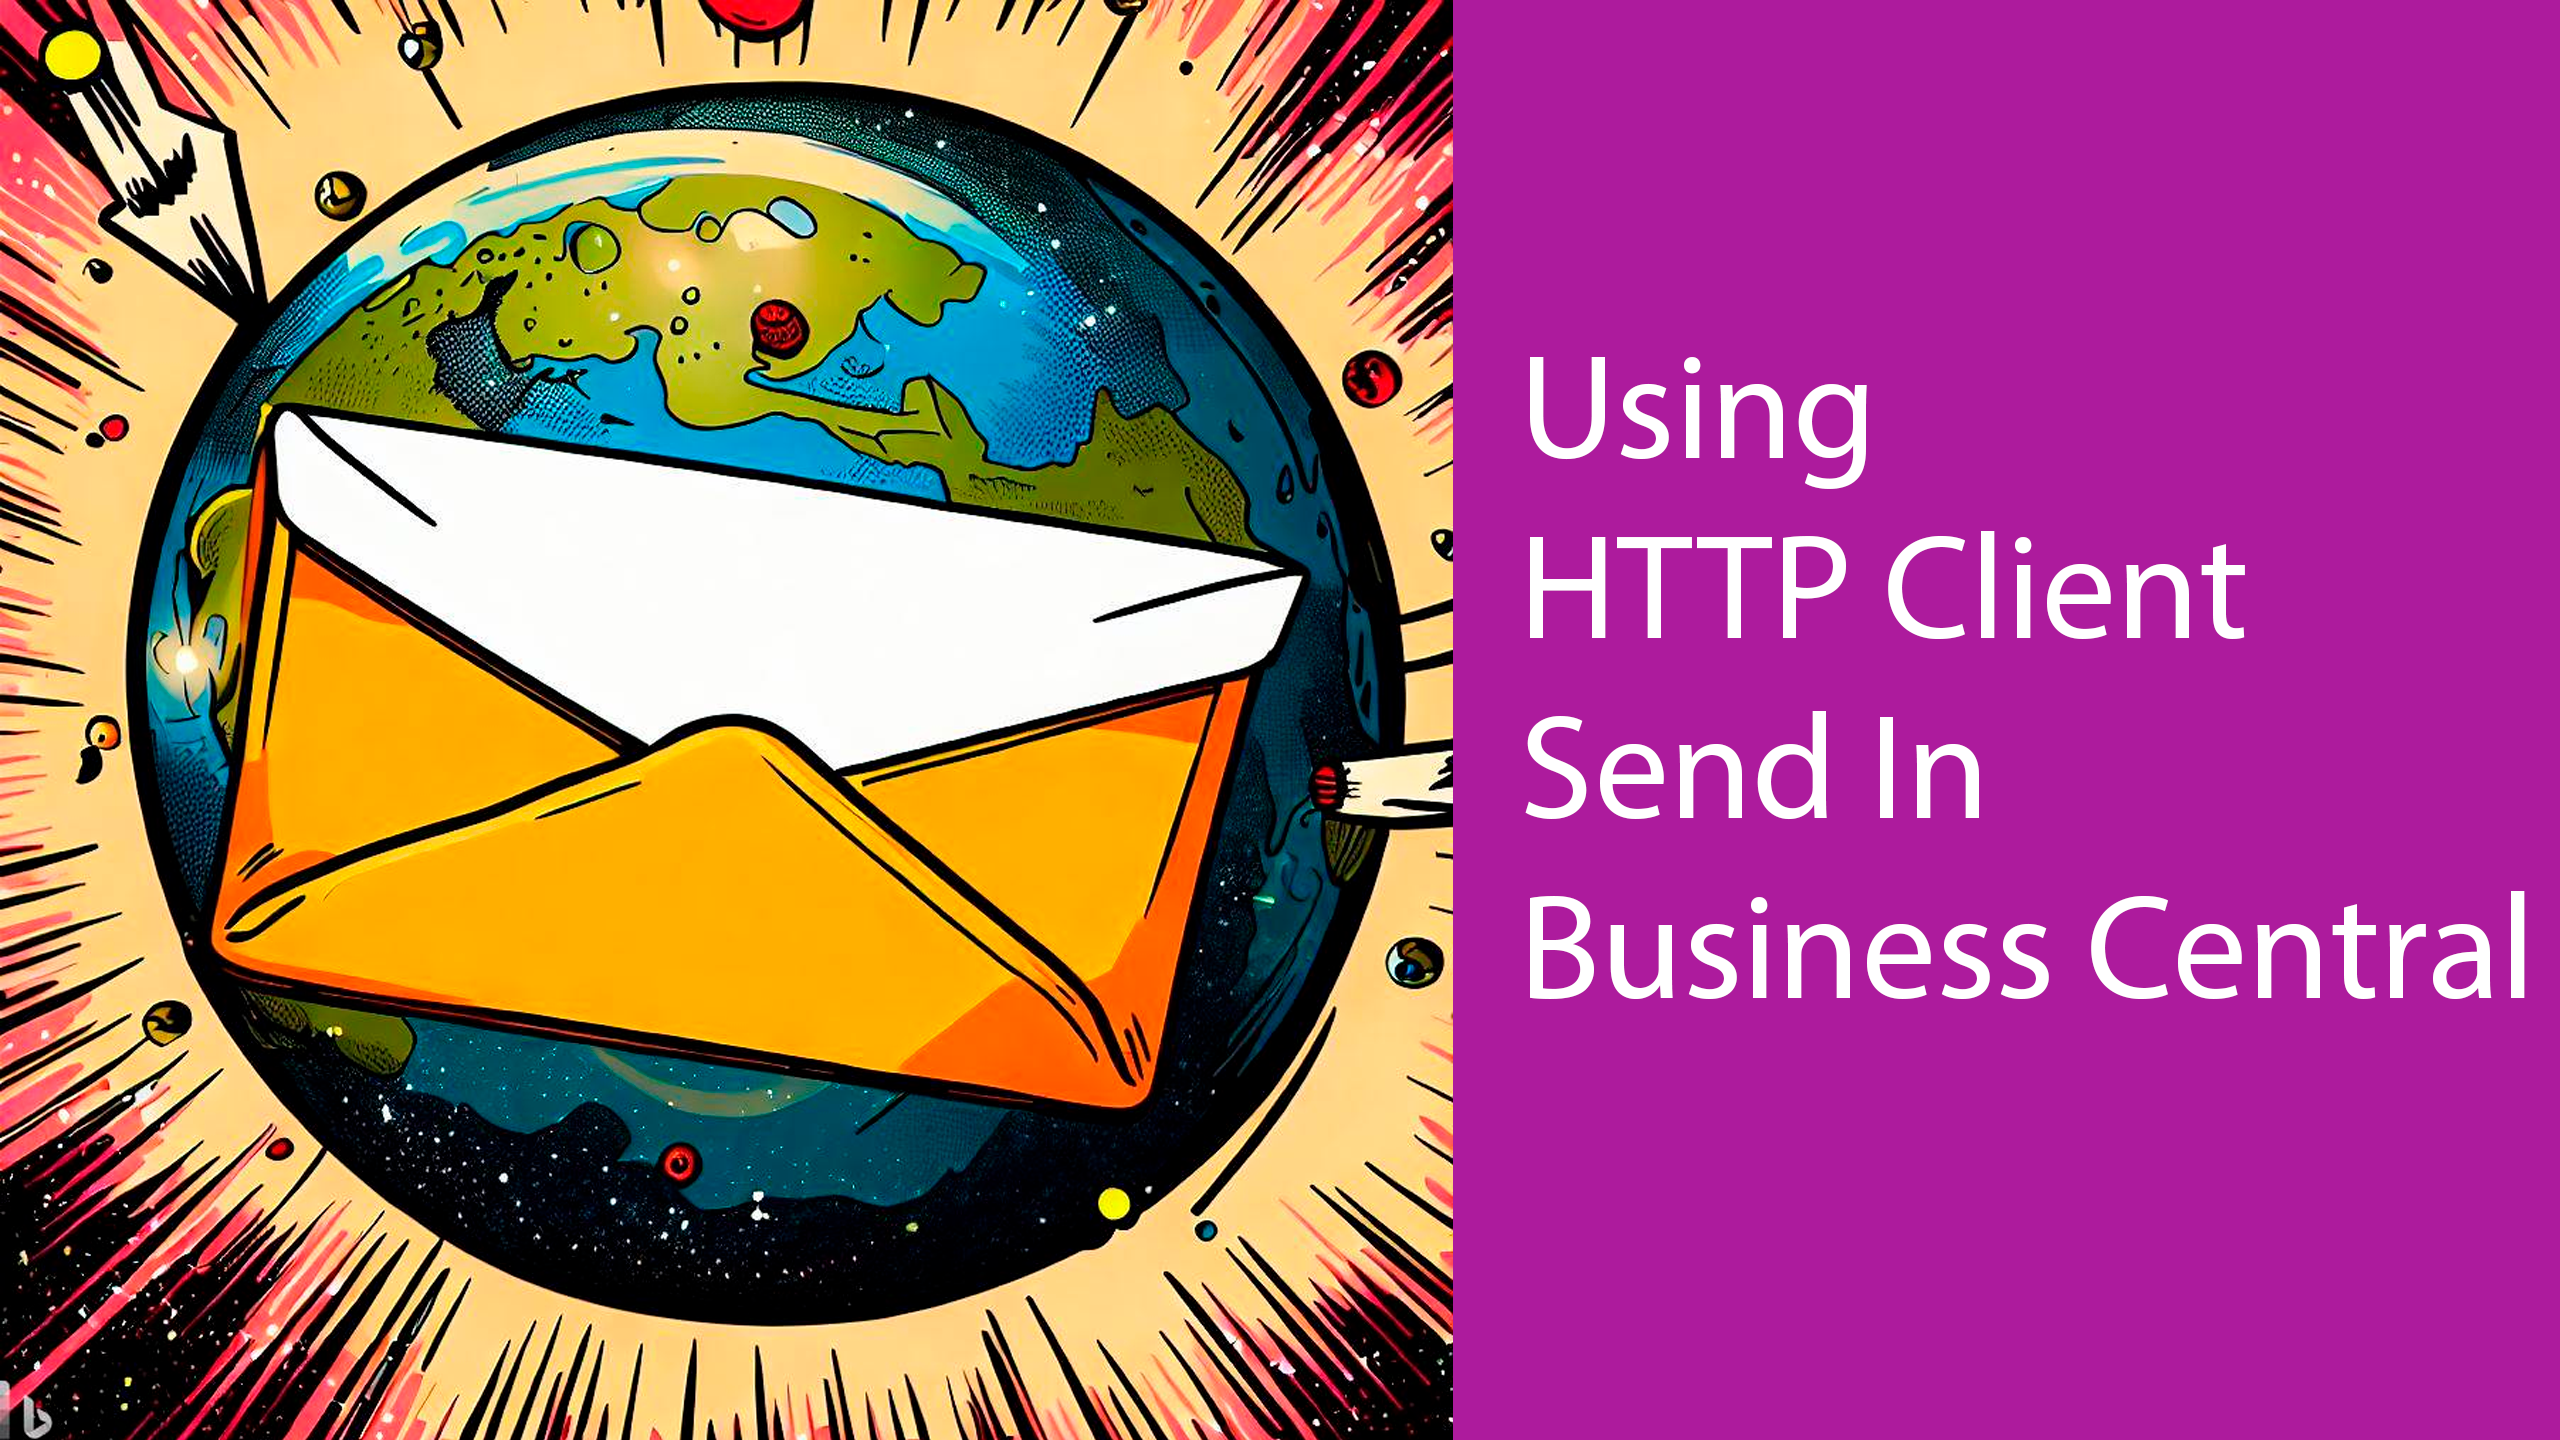 Using HTTP Client Send In Business Central